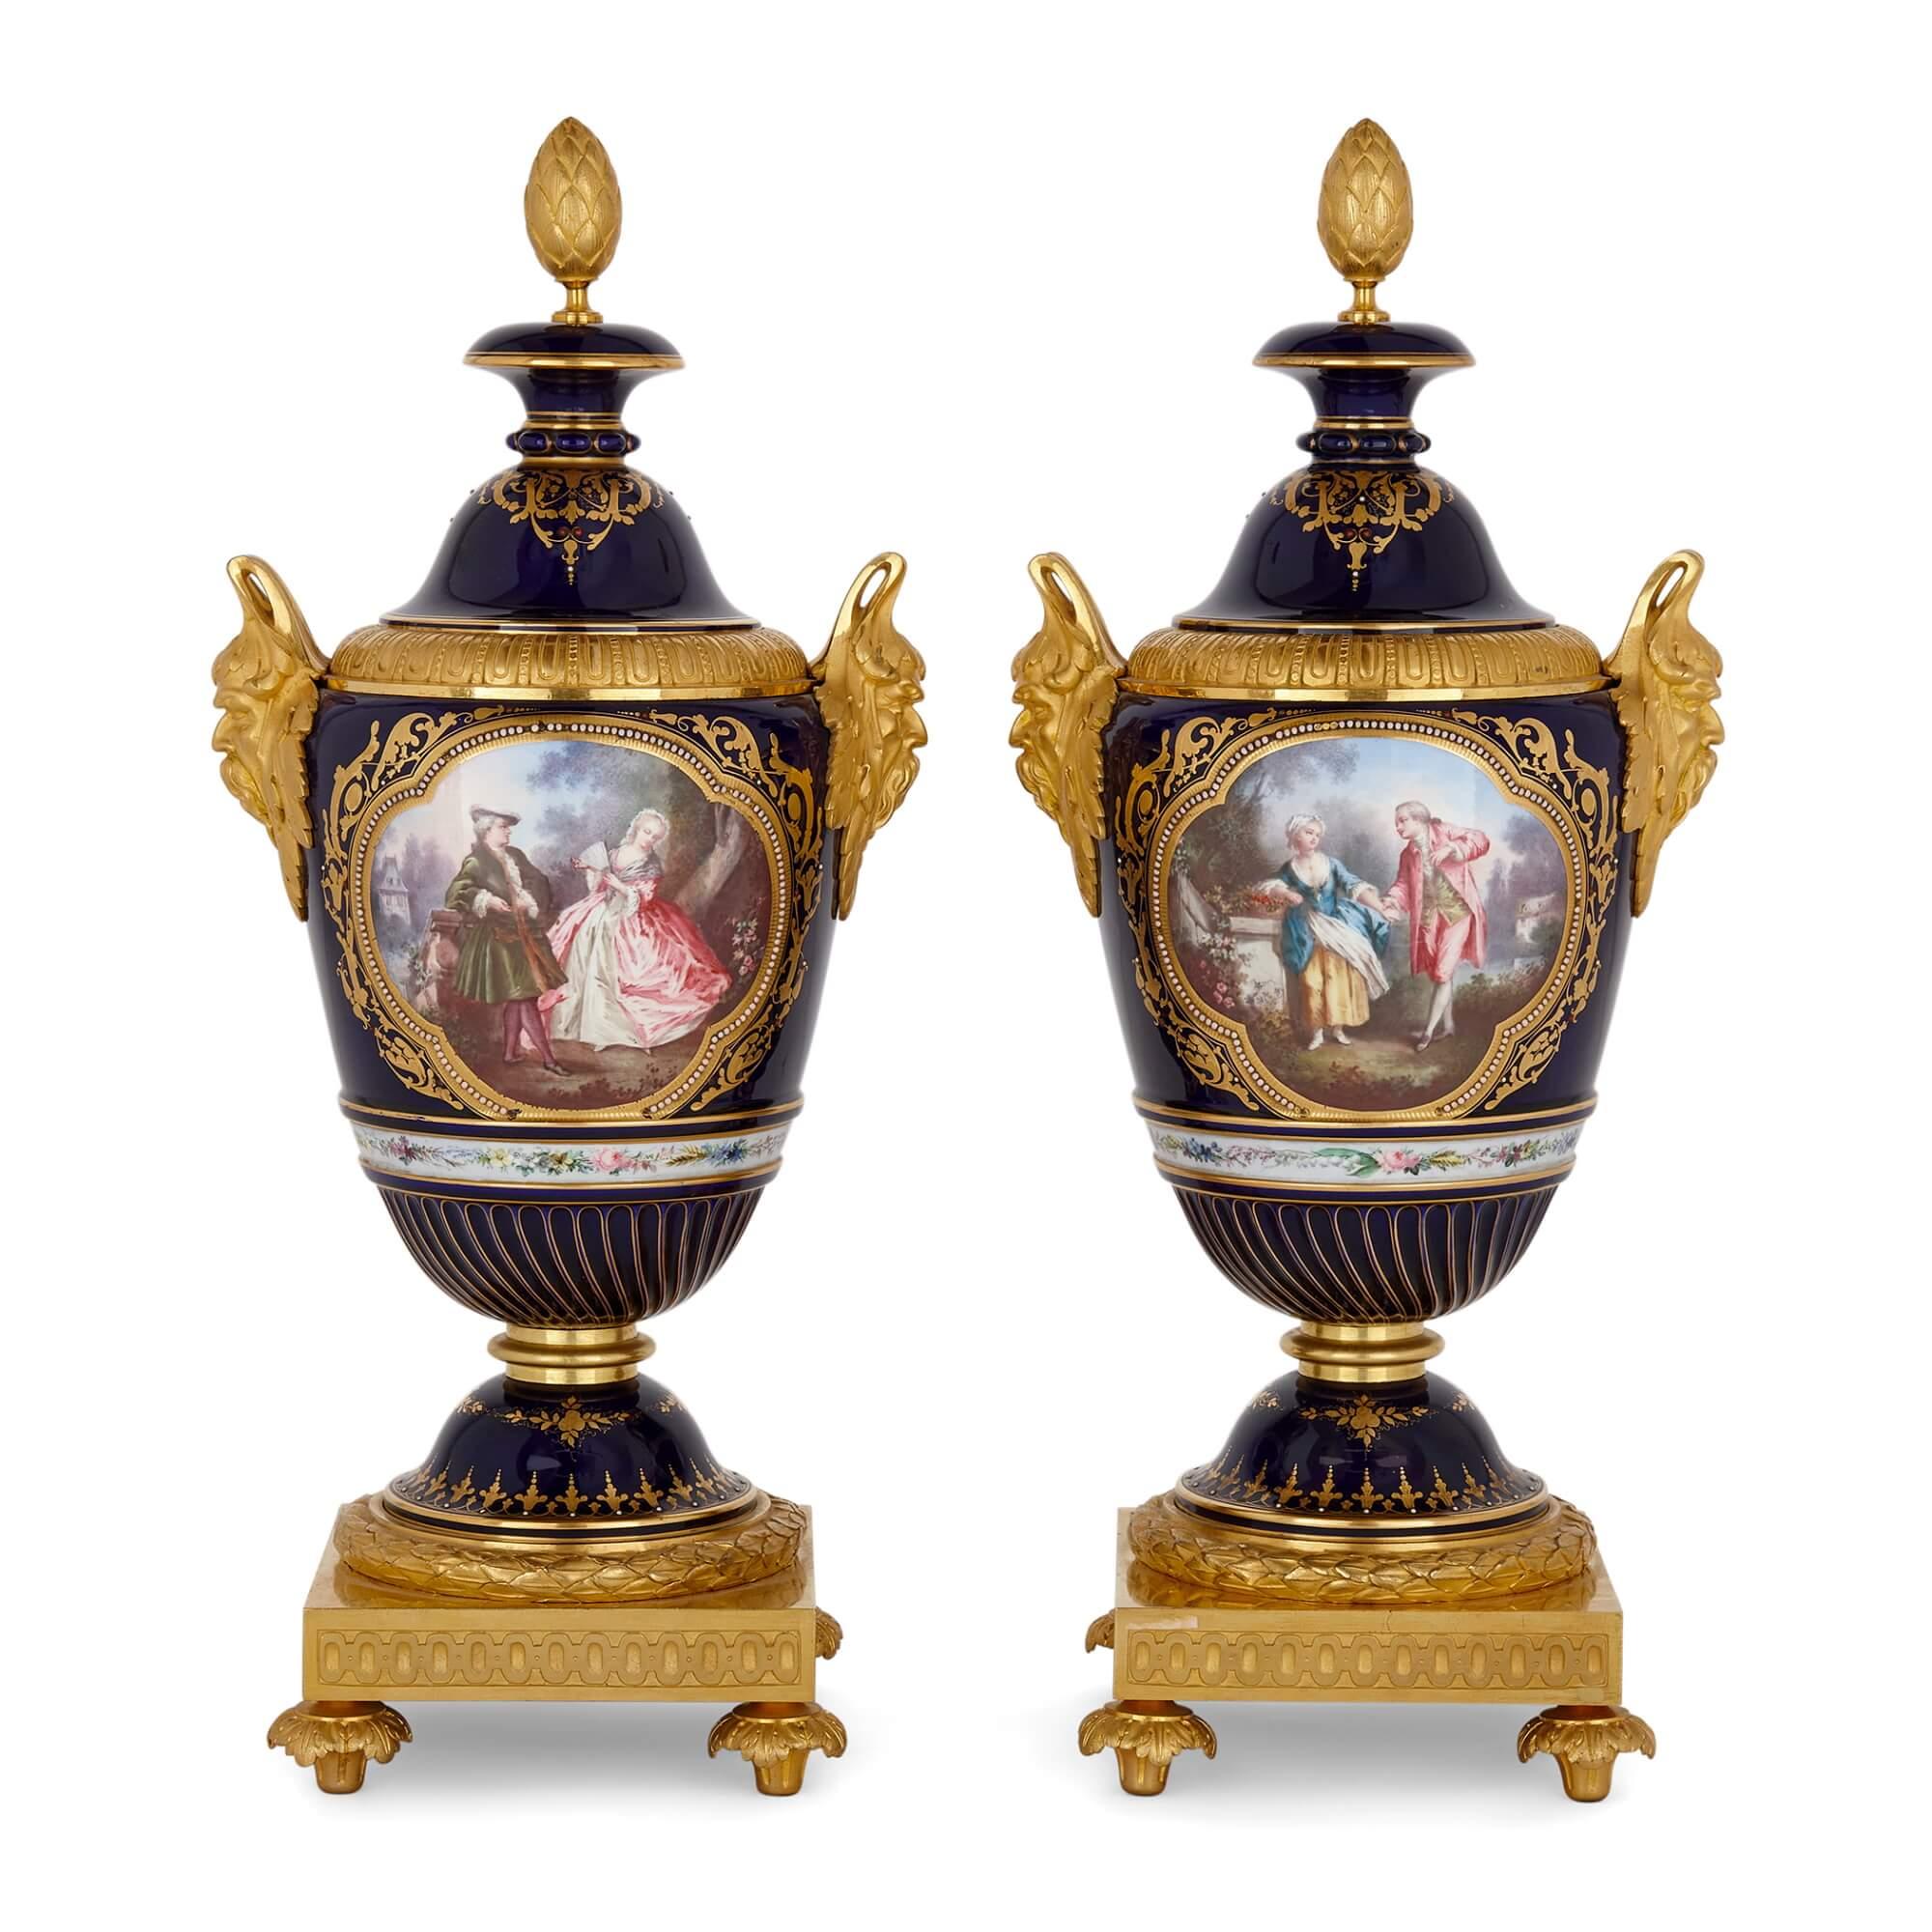 Pair of Sèvres style gilt bronze and jewelled porcelain vases 
French, Late 19th Century 
Height 46cm, width 21cm, depth 16cm

Made in the style of the famous Sèvres porcelain manufactory, this charming pair of vases depict figural as well as nature